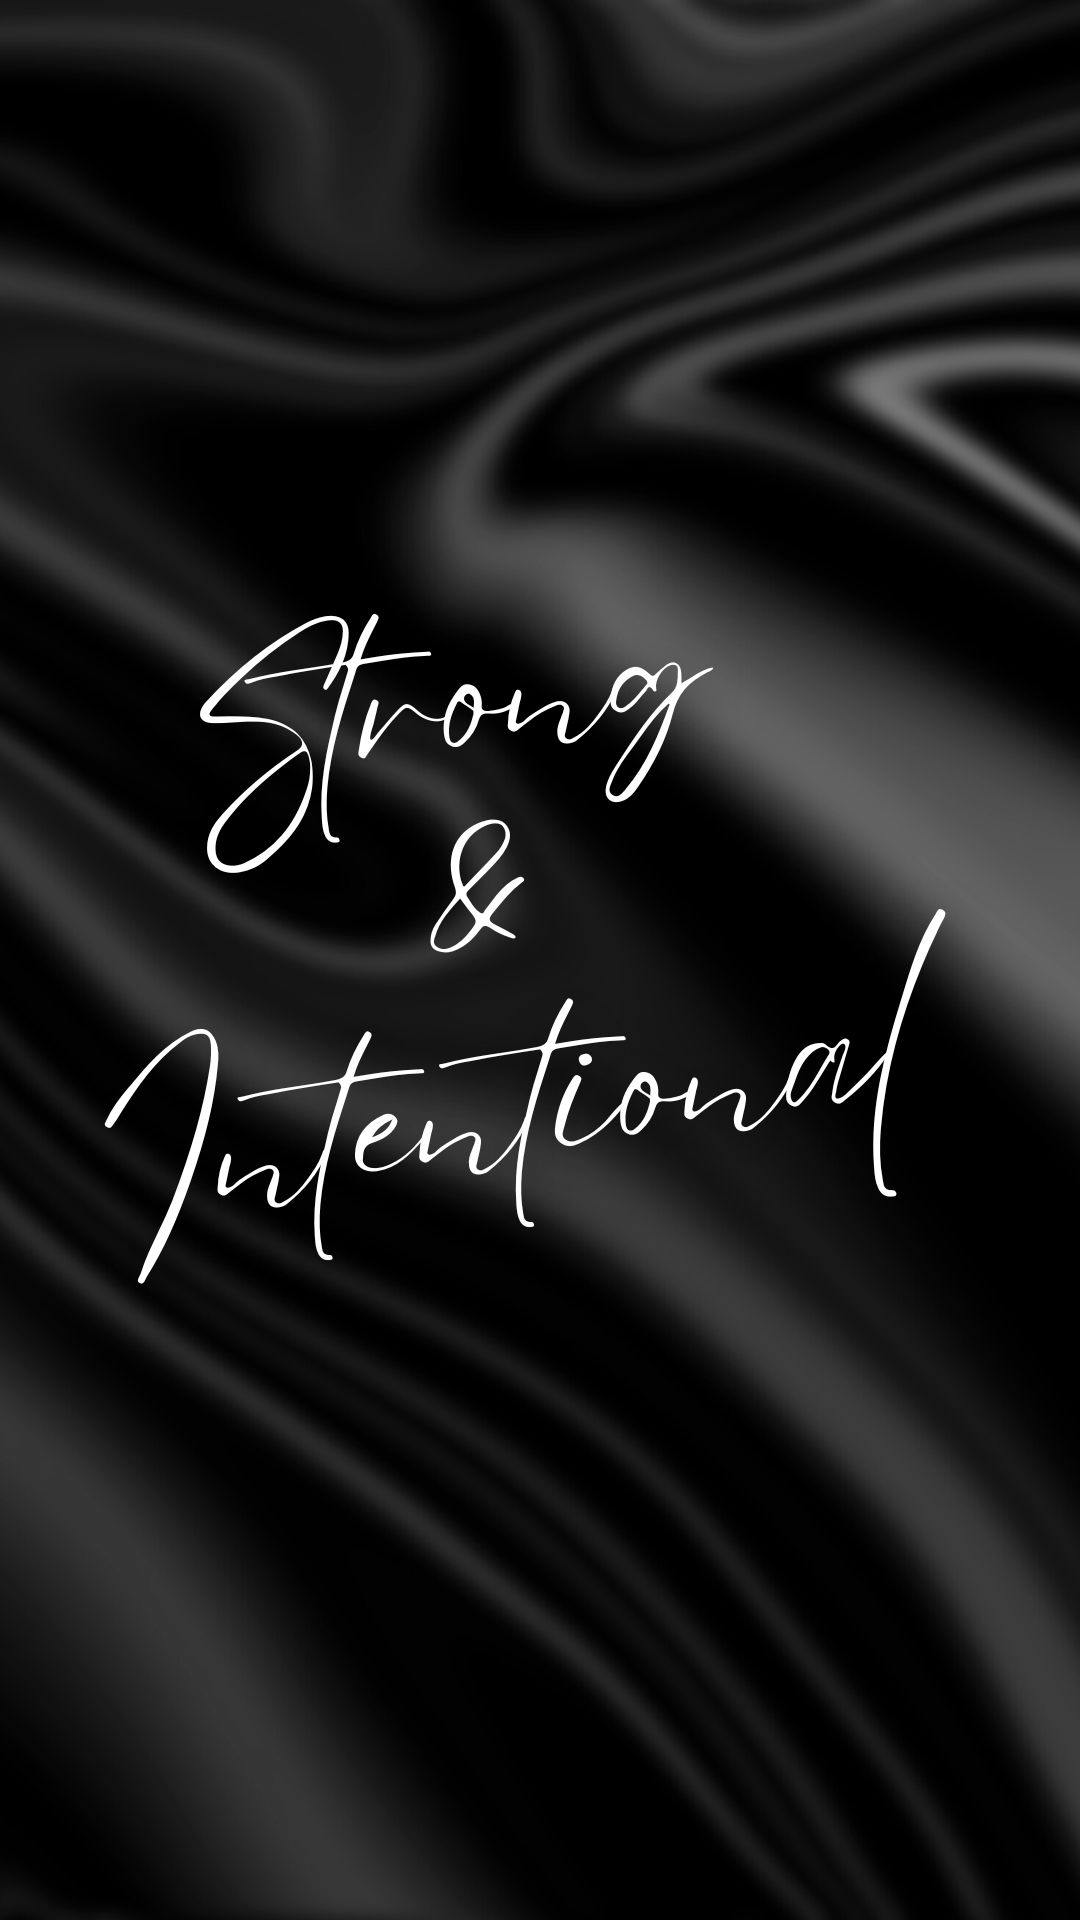 A black background with muted white swirls. The words "Strong & Intentional" are shown in a scripted white font.